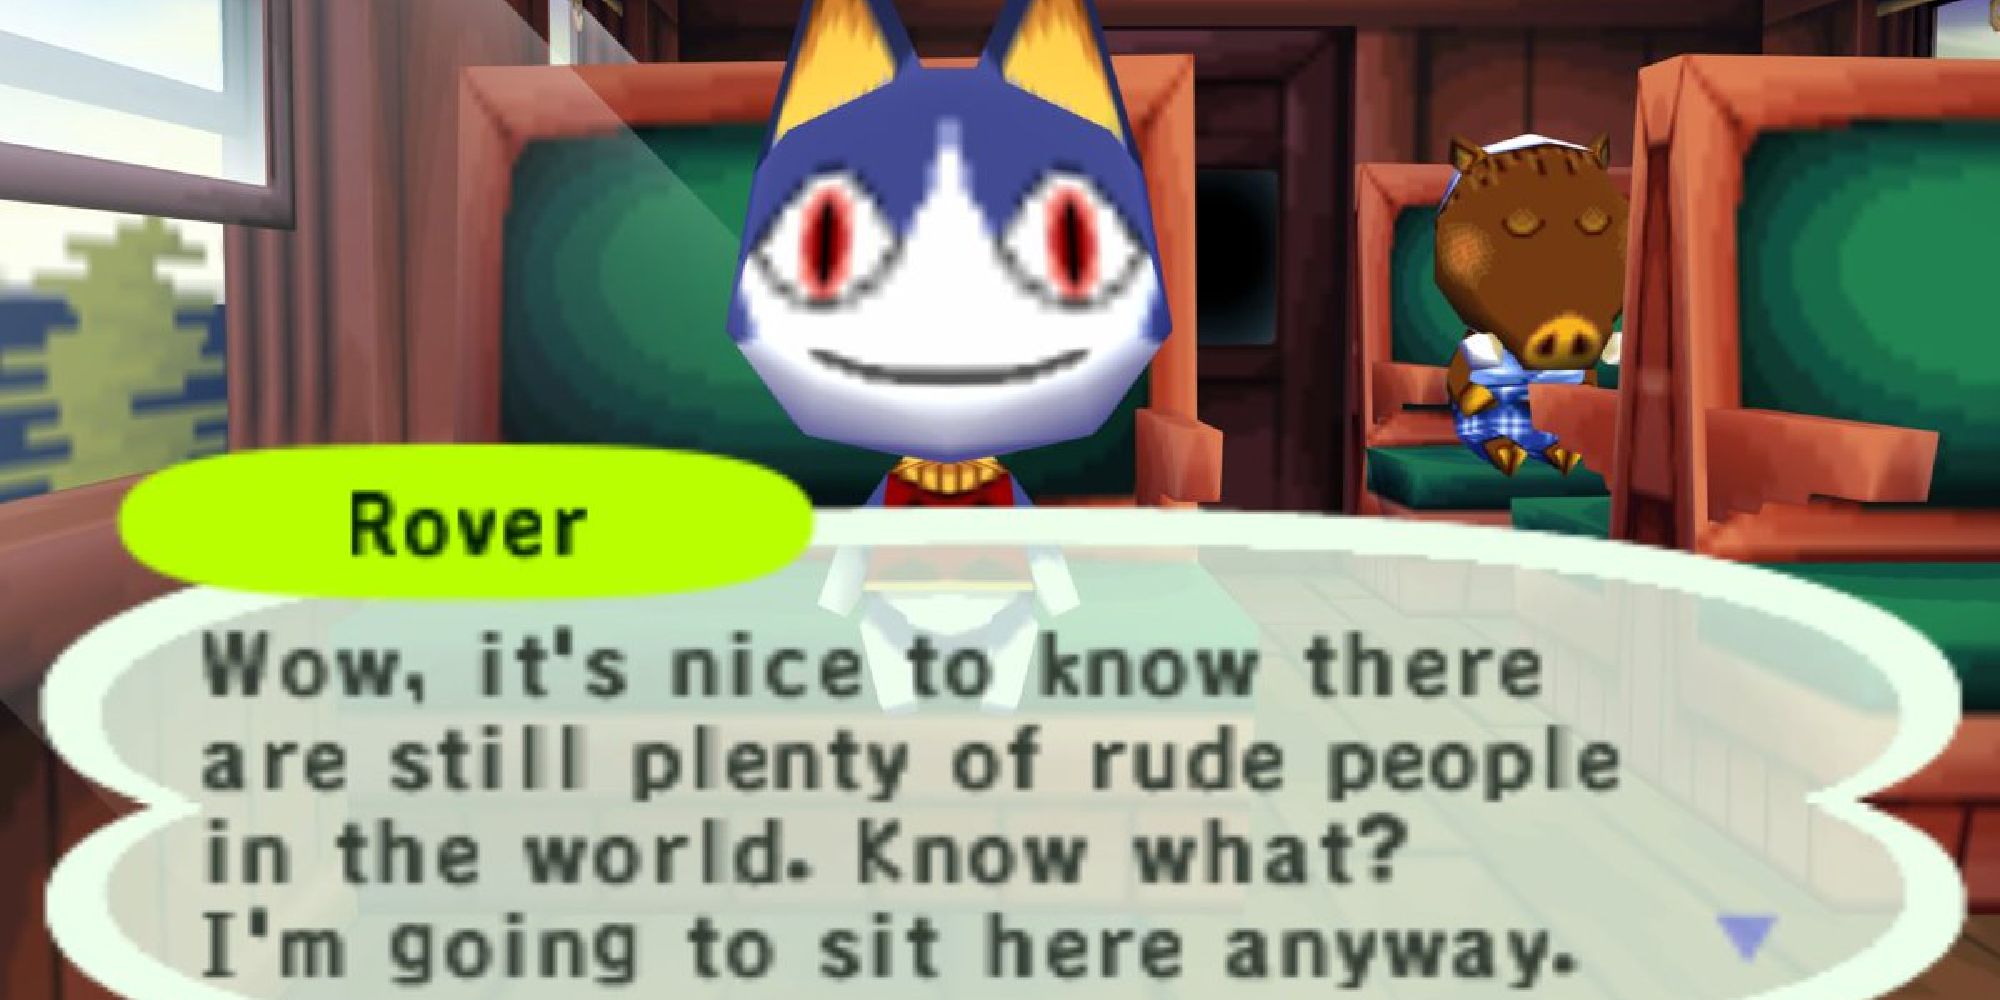 A screenshot of the original Animal Crossing for the Gamecube, showing Rover insulting the player during the game's introduction